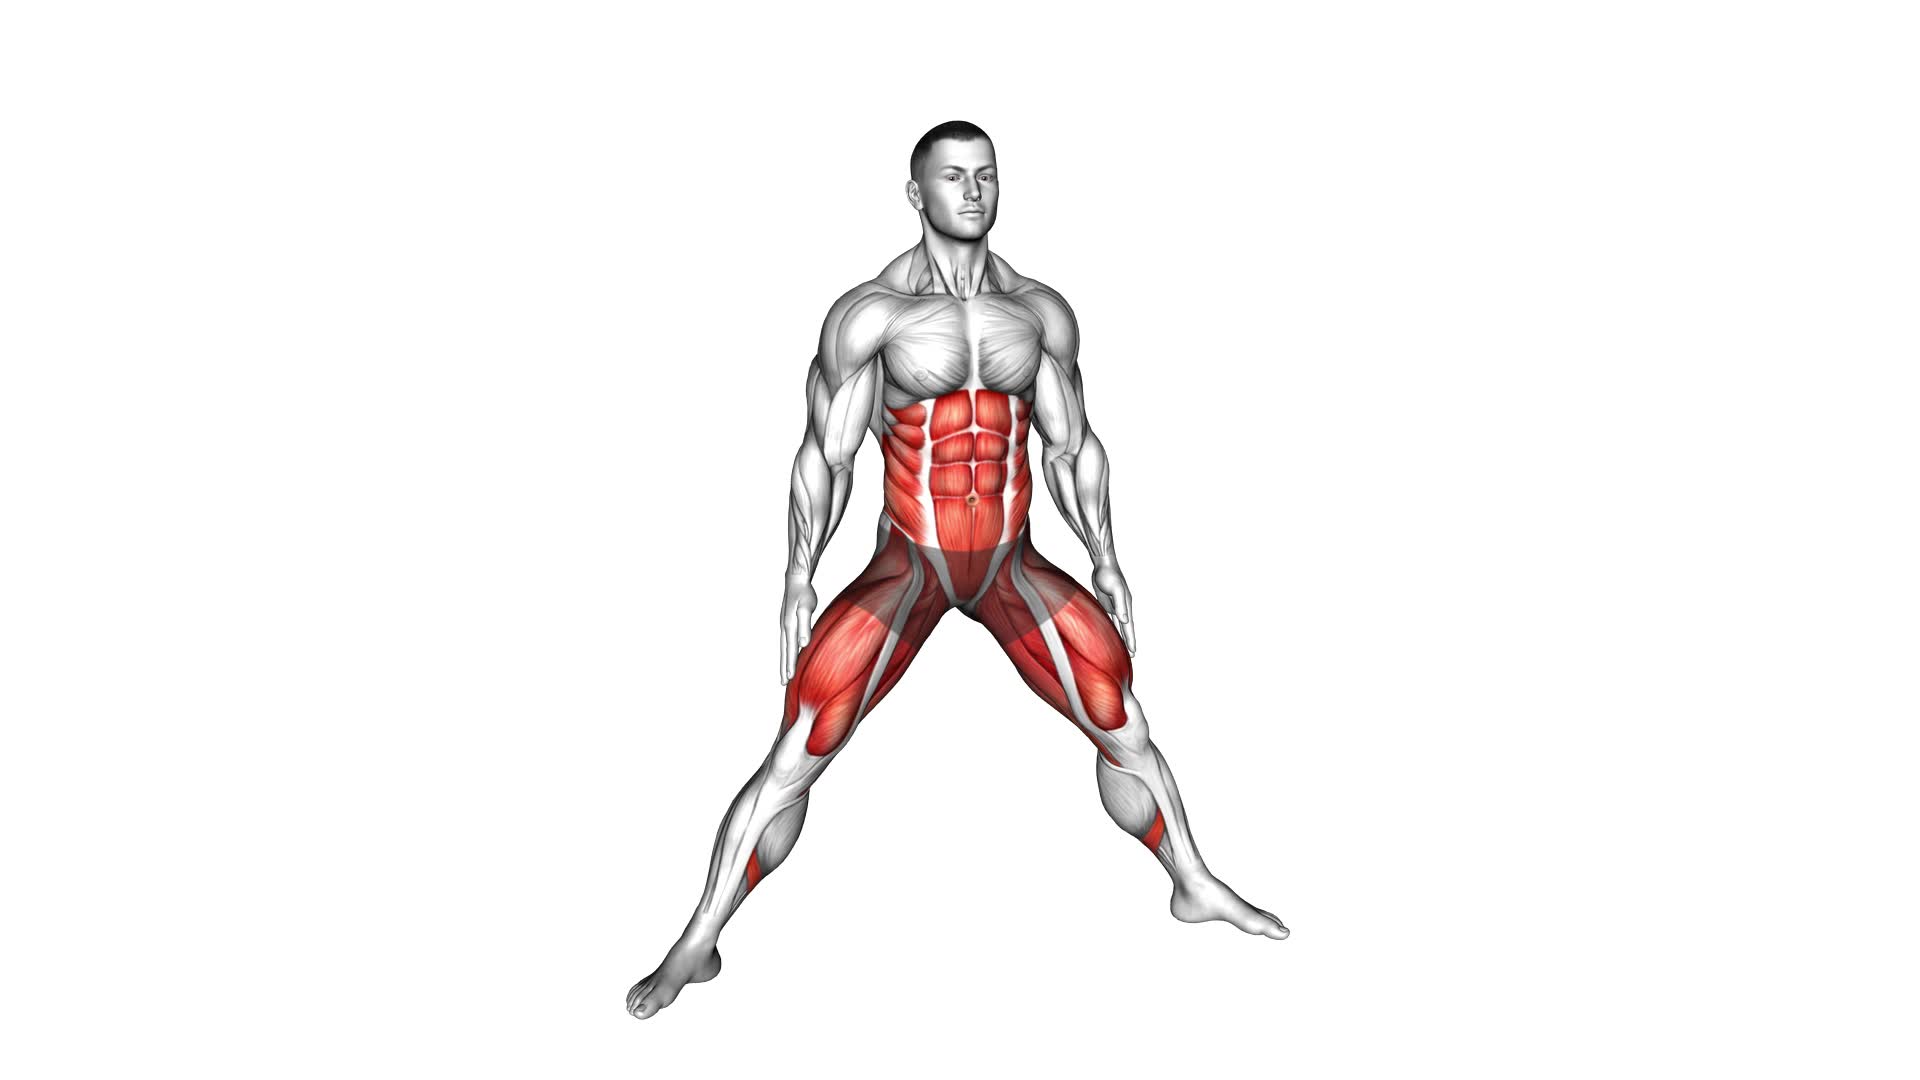 Plyo Side Lunge Stretch (male) - Video Exercise Guide & Tips